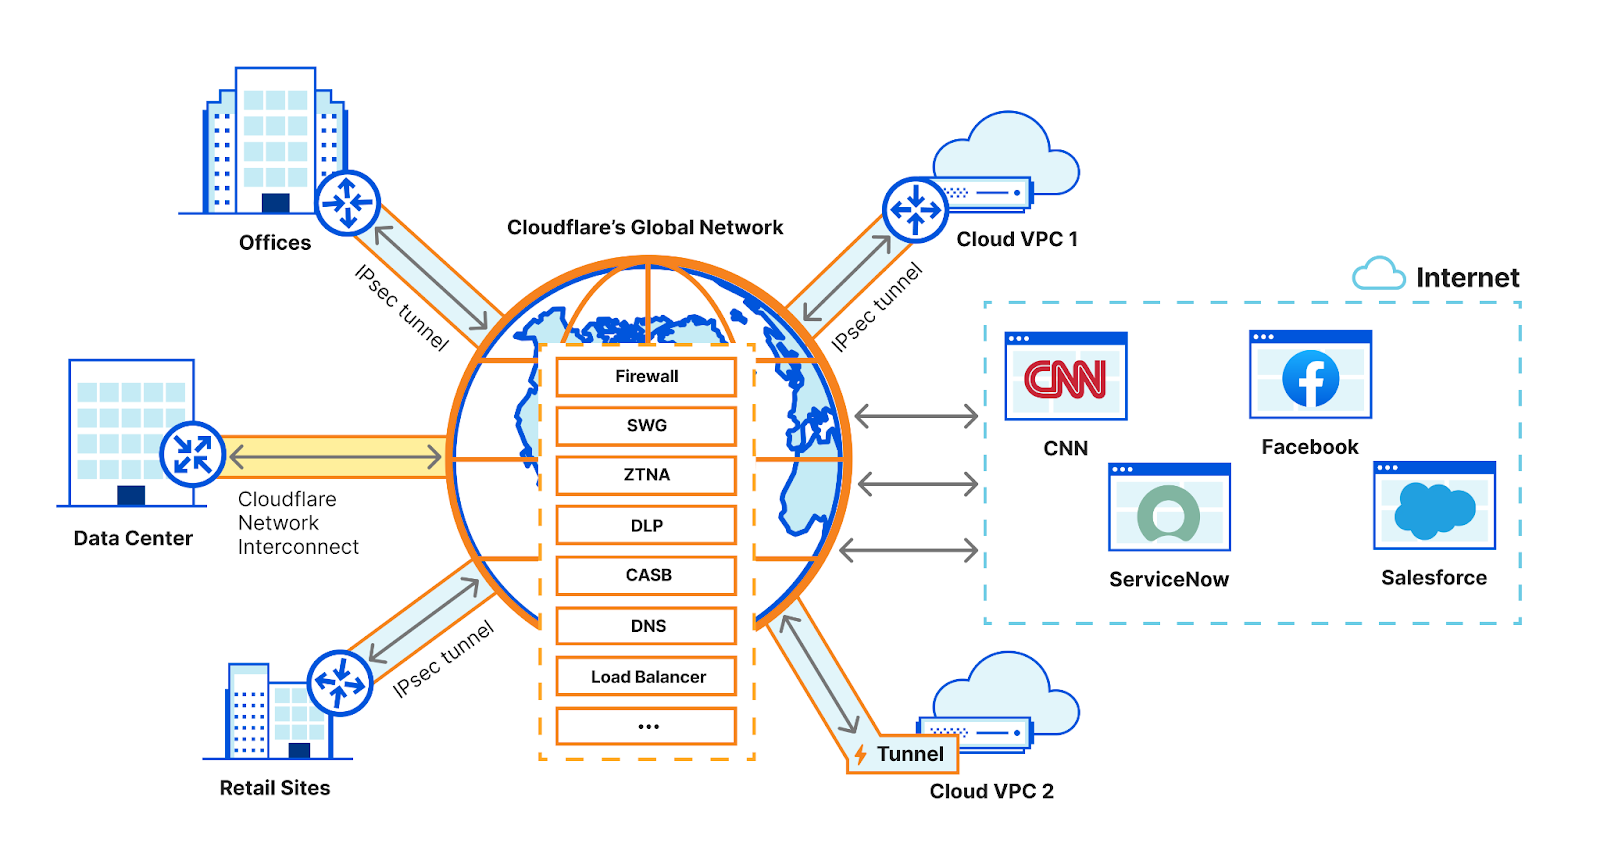 Diagram showing Cloudflare Magic WAN connecting branch offices, data centers, and VPCs to security services on Cloudflare’s global network.